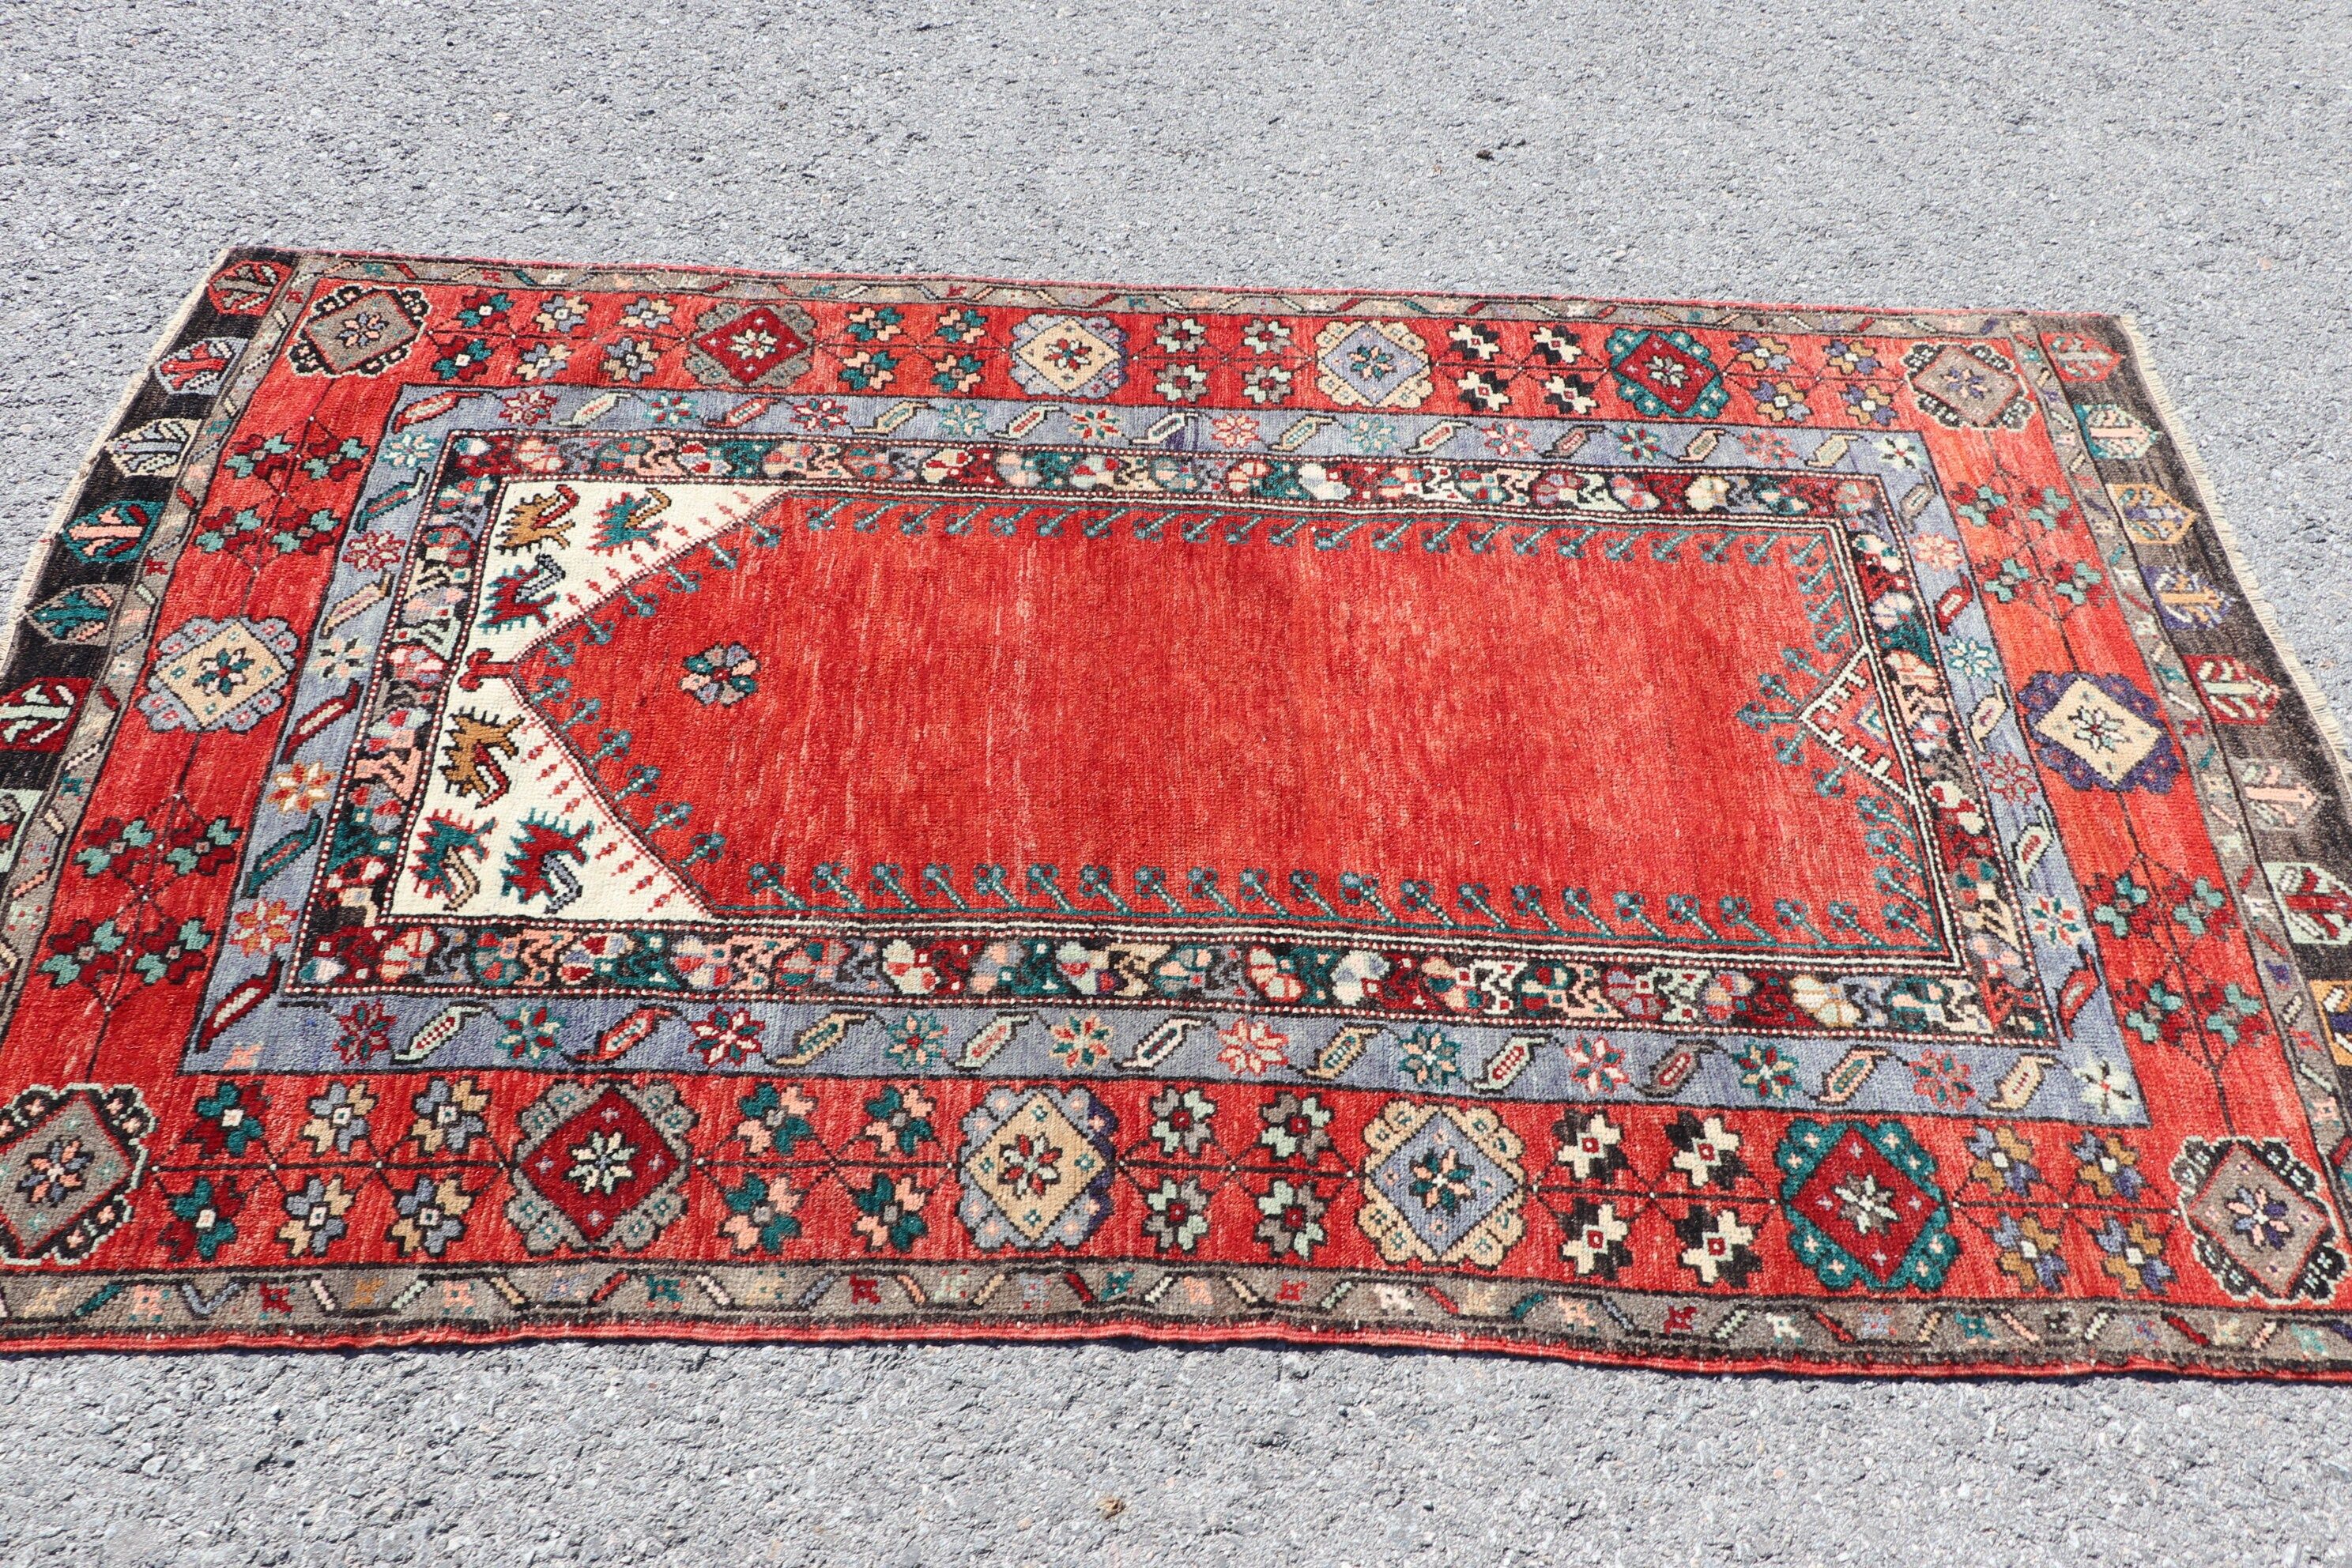 Vintage Rugs, 3.8x6.5 ft Area Rug, Indoor Rugs, Turkish Rug, Rugs for Area, Kitchen Rugs, Cool Rug, Red Floor Rugs, Home Decor Rug